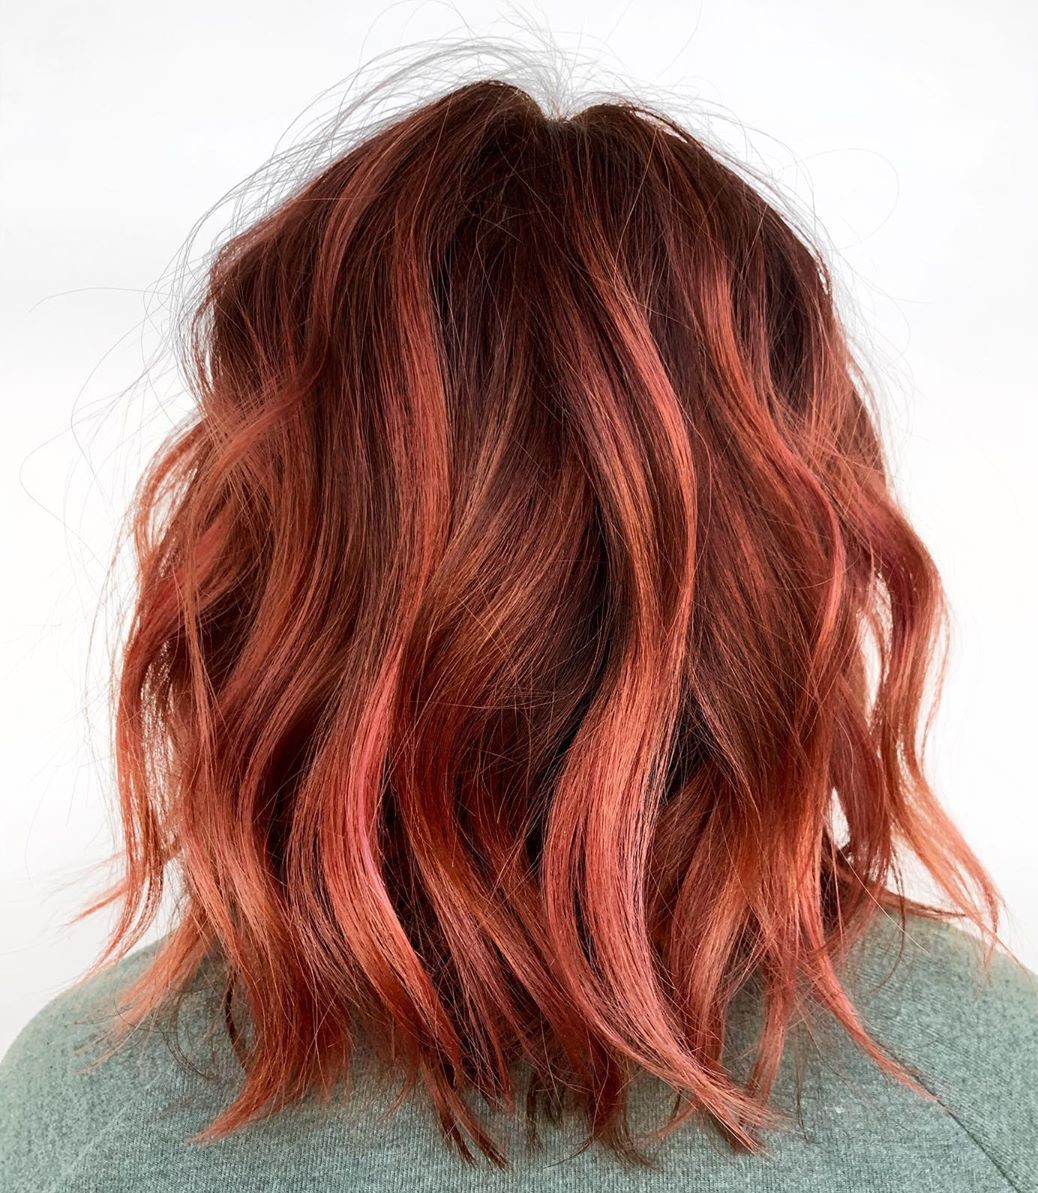 Fire Ombre Hair: How To Try The Flaming Hot Trend In 2023